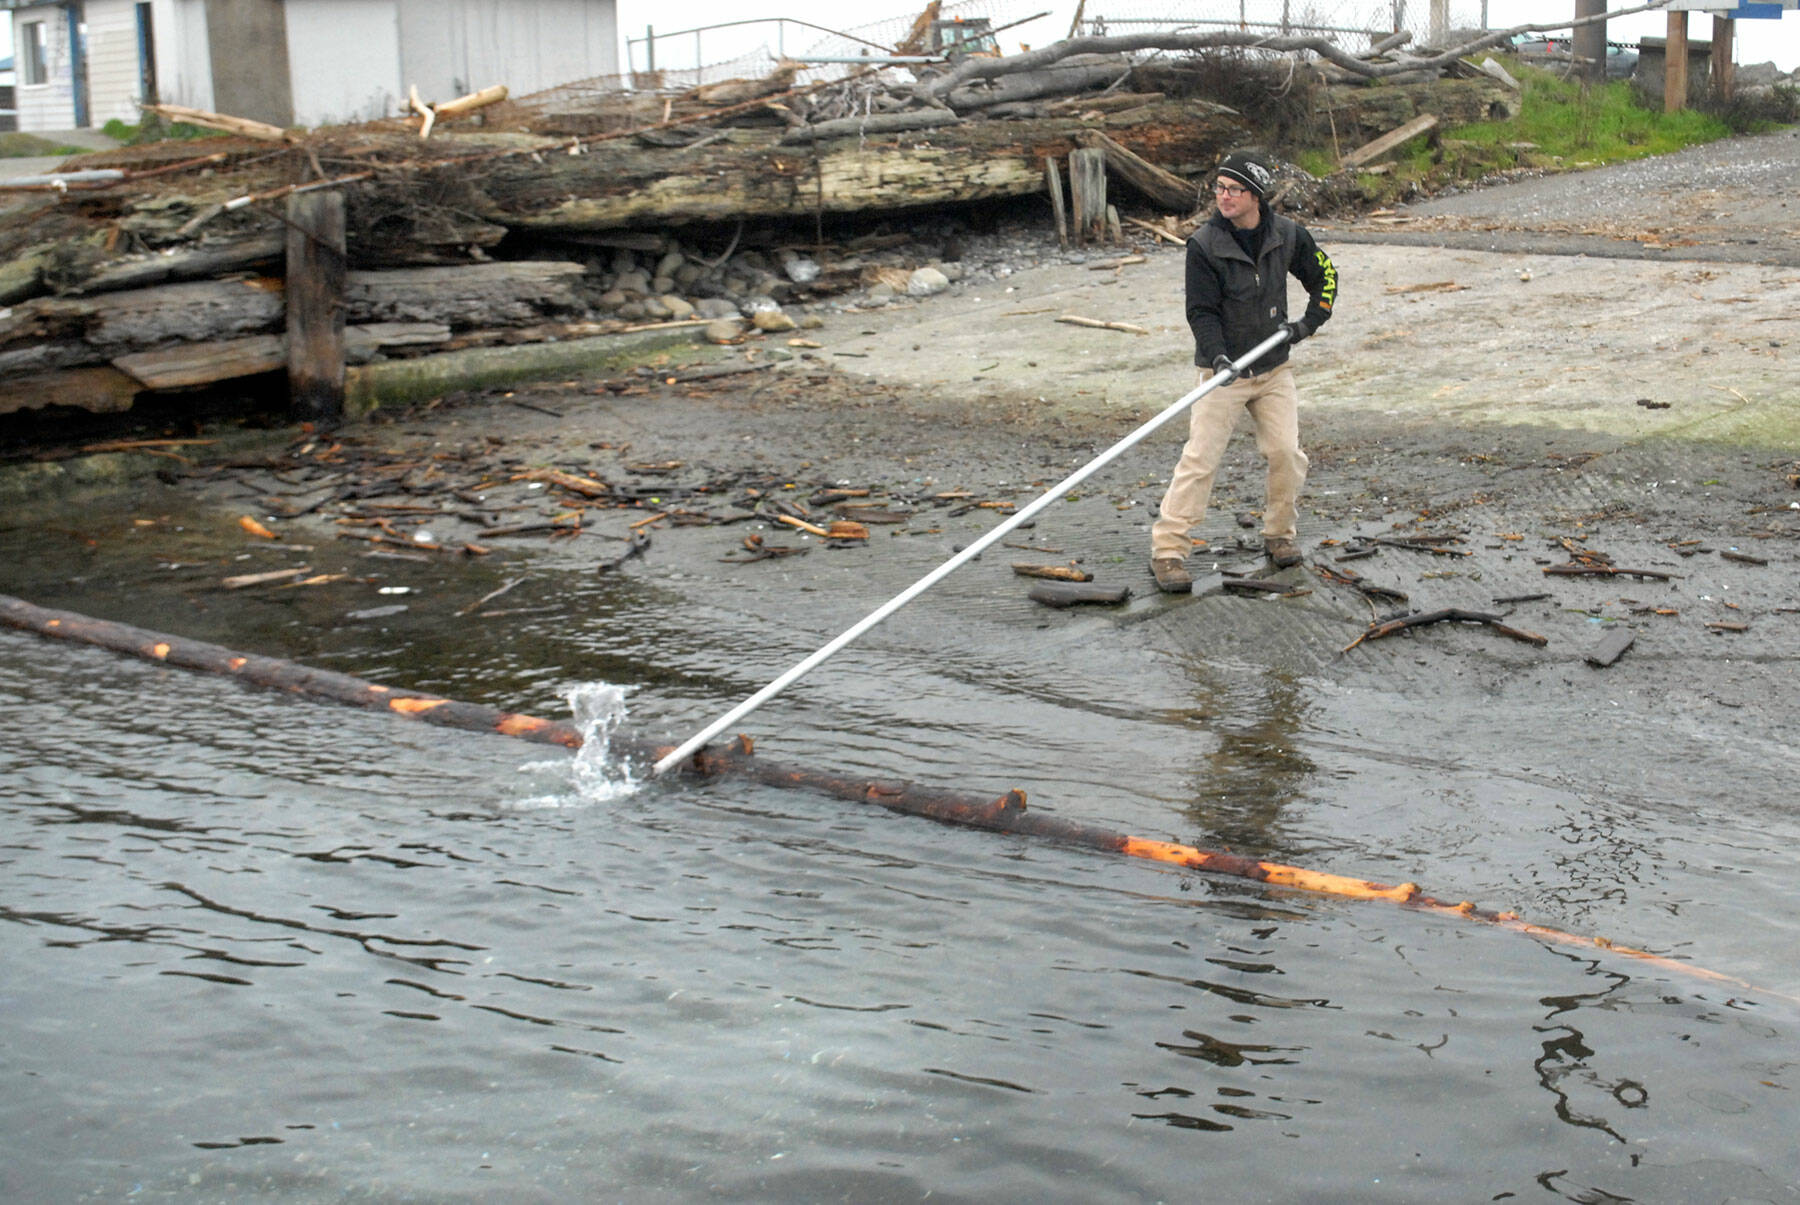 Port Angeles Parks and Recreation Department employee Eli Hammel snags a floating log blocking a portion of a city-operated boat ramp on Ediz Hook on Thursday. The log was later removed with a front loader and deposited with other woody debris nearby. (Keith Thorpe/Peninsula Daily News)